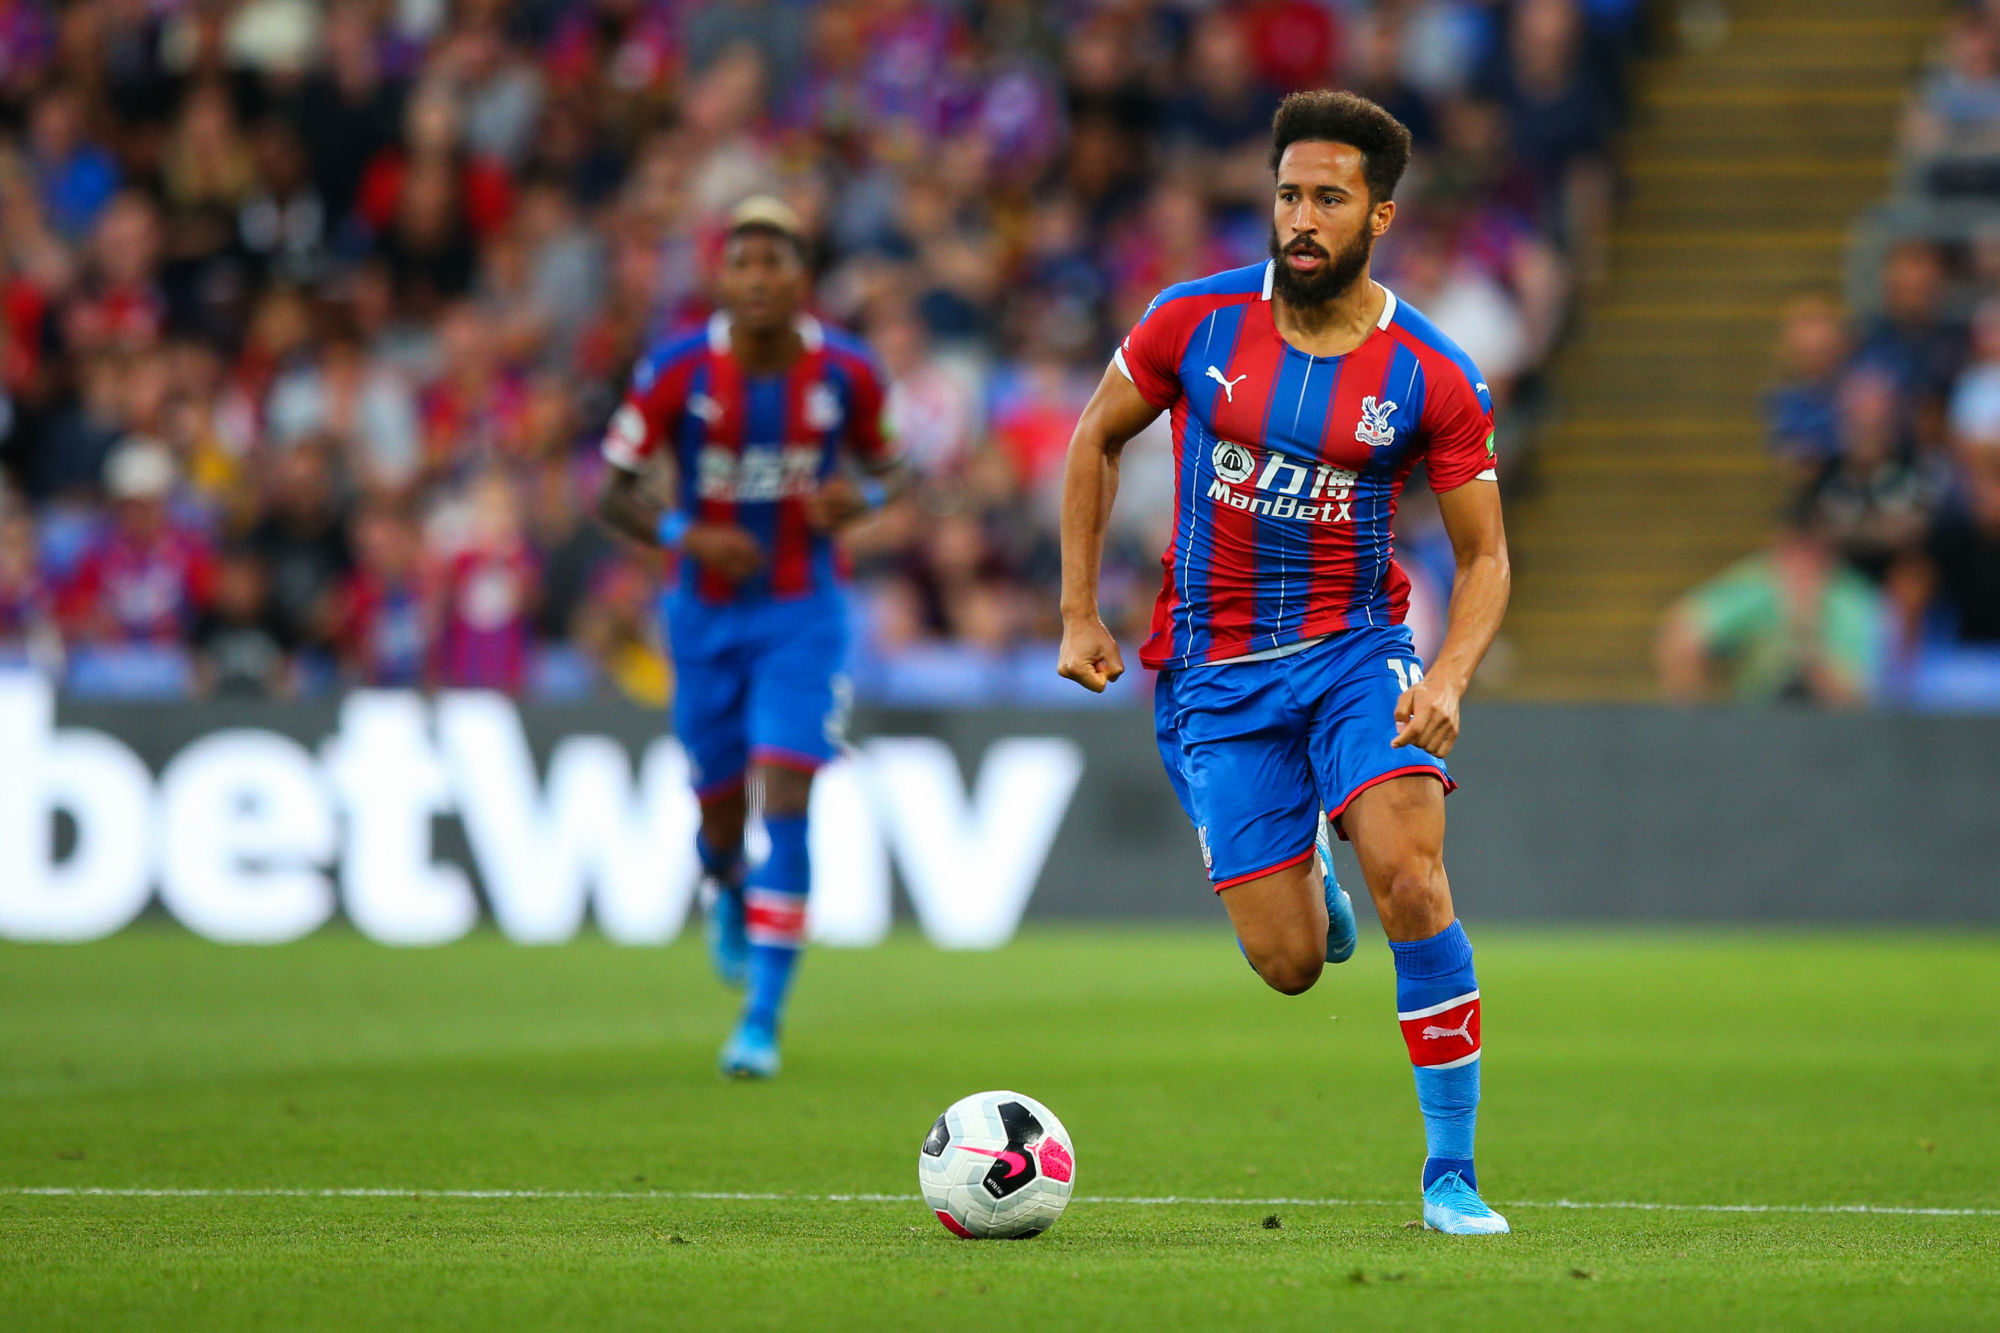 Andros Townsend of Crystal Palace in action during the Premier League match at Selhurst Park, London. Picture date: 31st August 2019. Photo : PA Images / Icon Sport